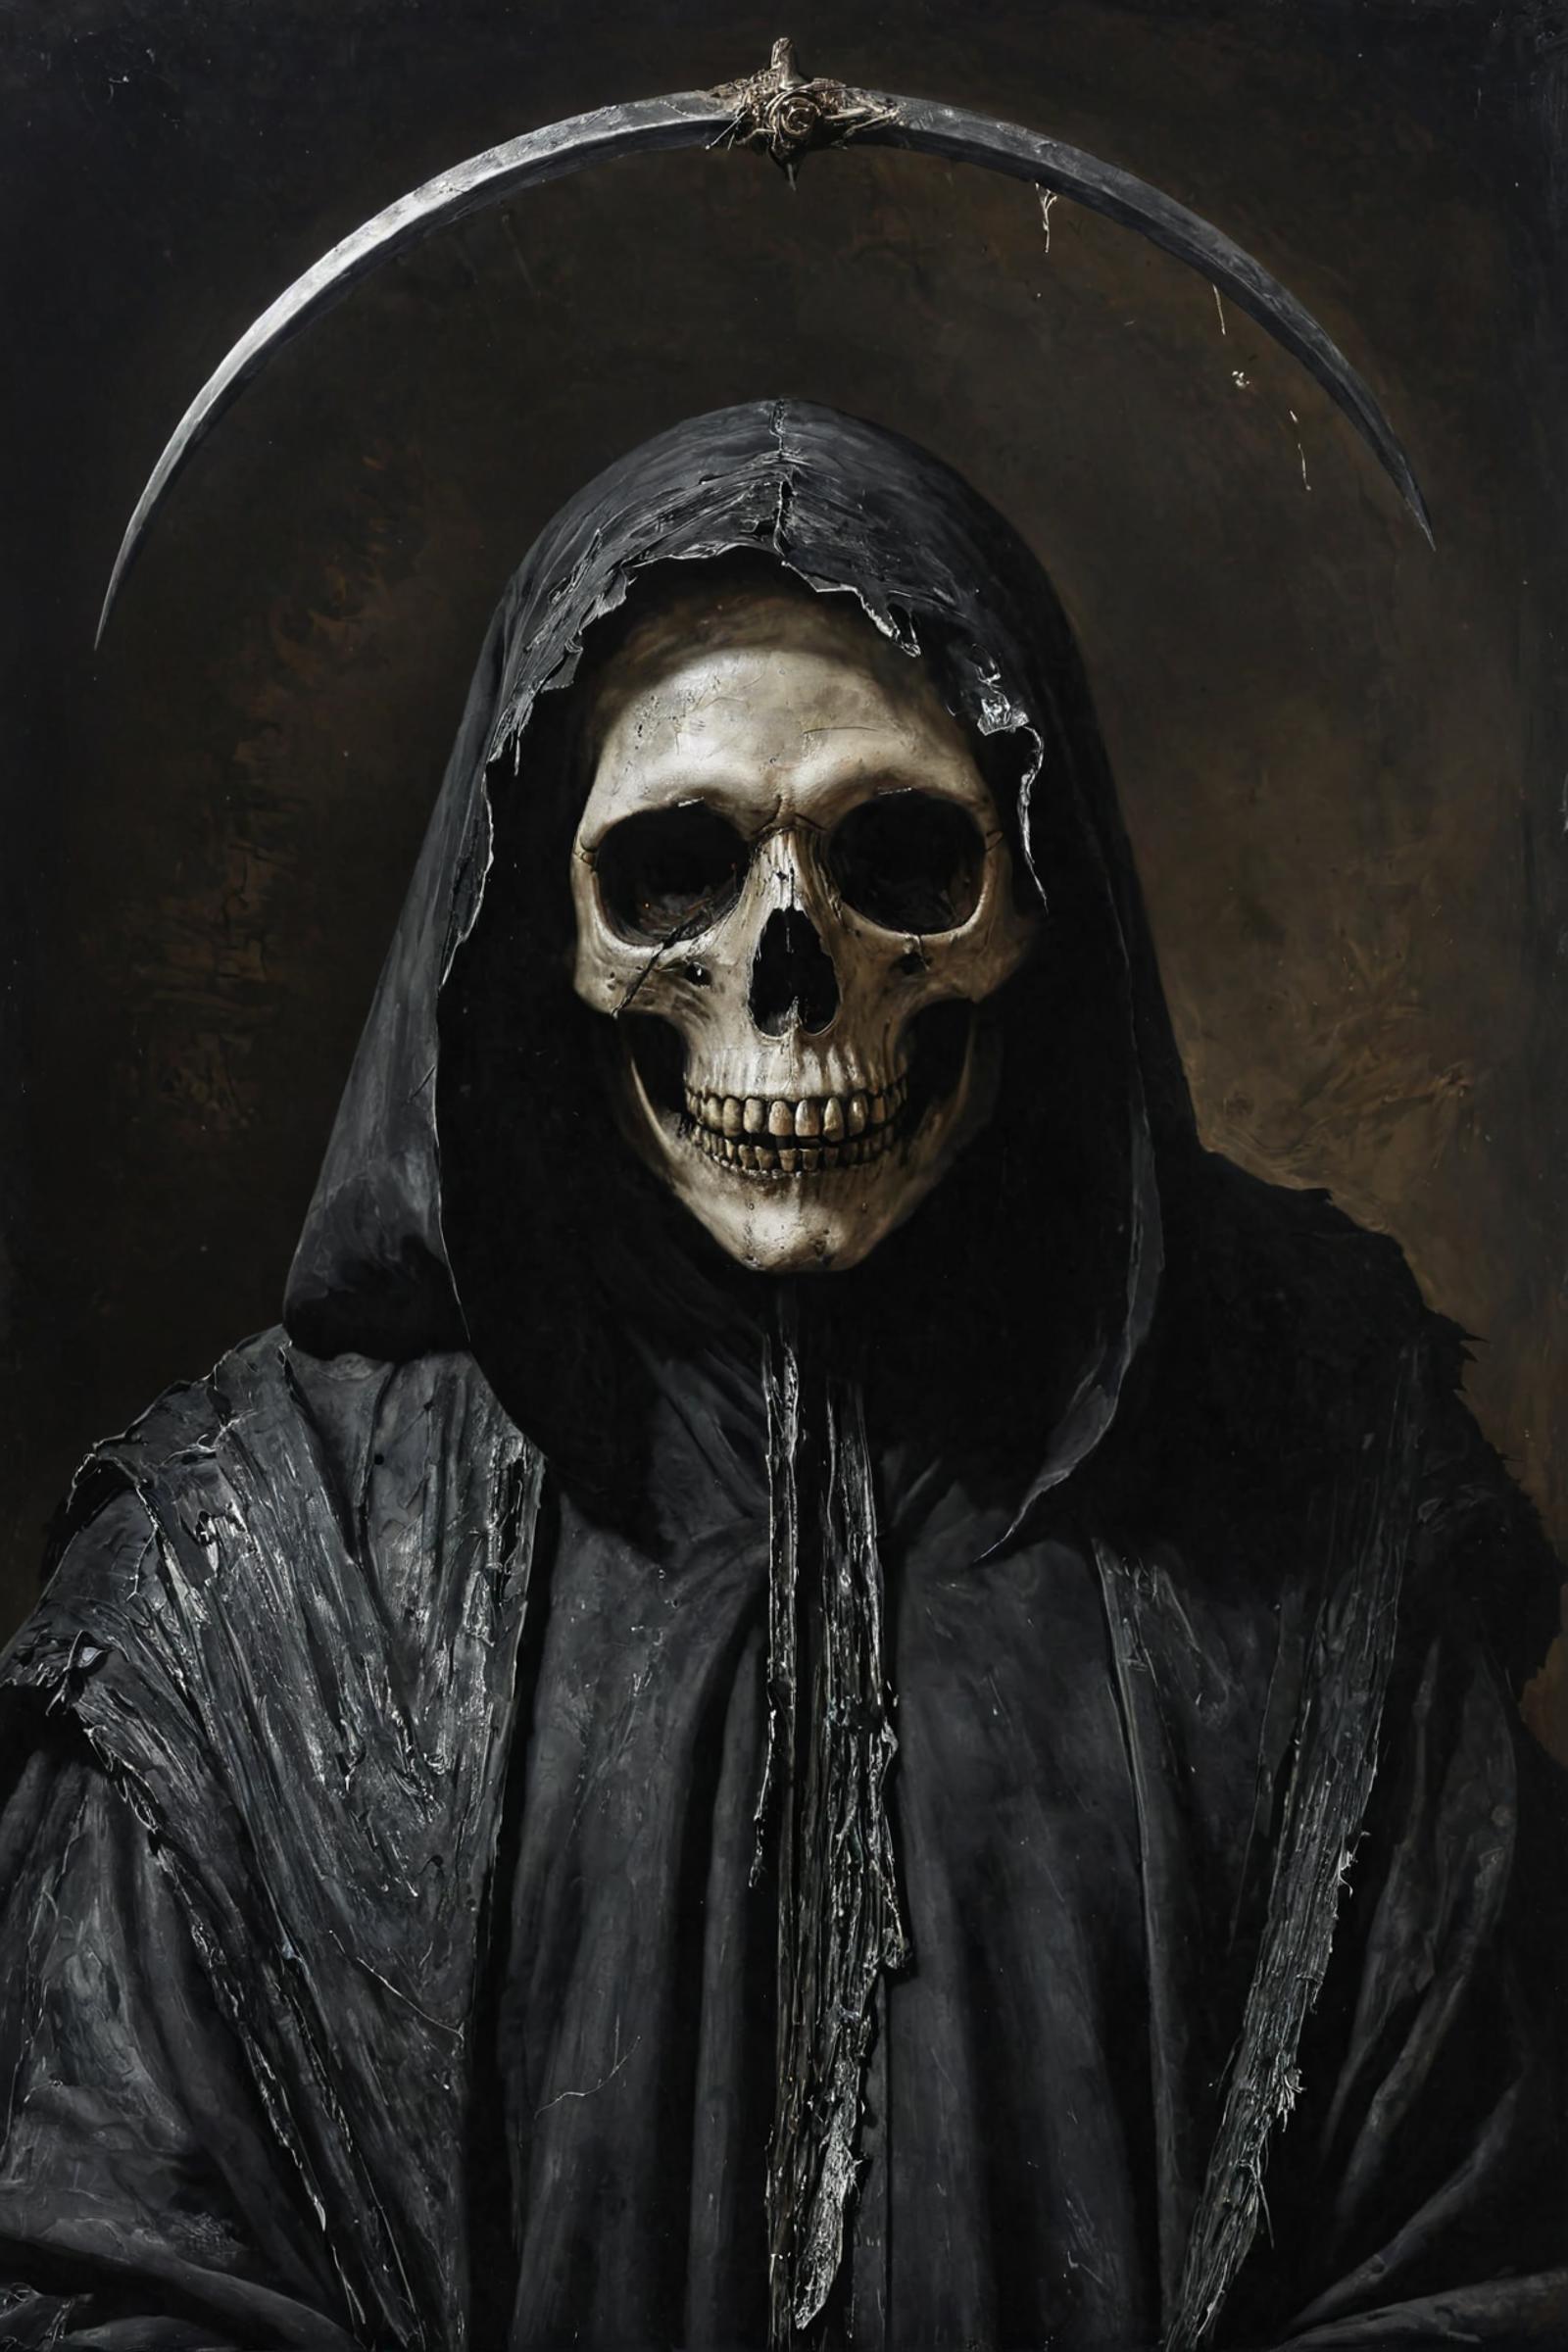 Grim Reaper Wearing a Cloak and Hood, Skeleton Head with Skull and Crossbones on Outstretched Arm